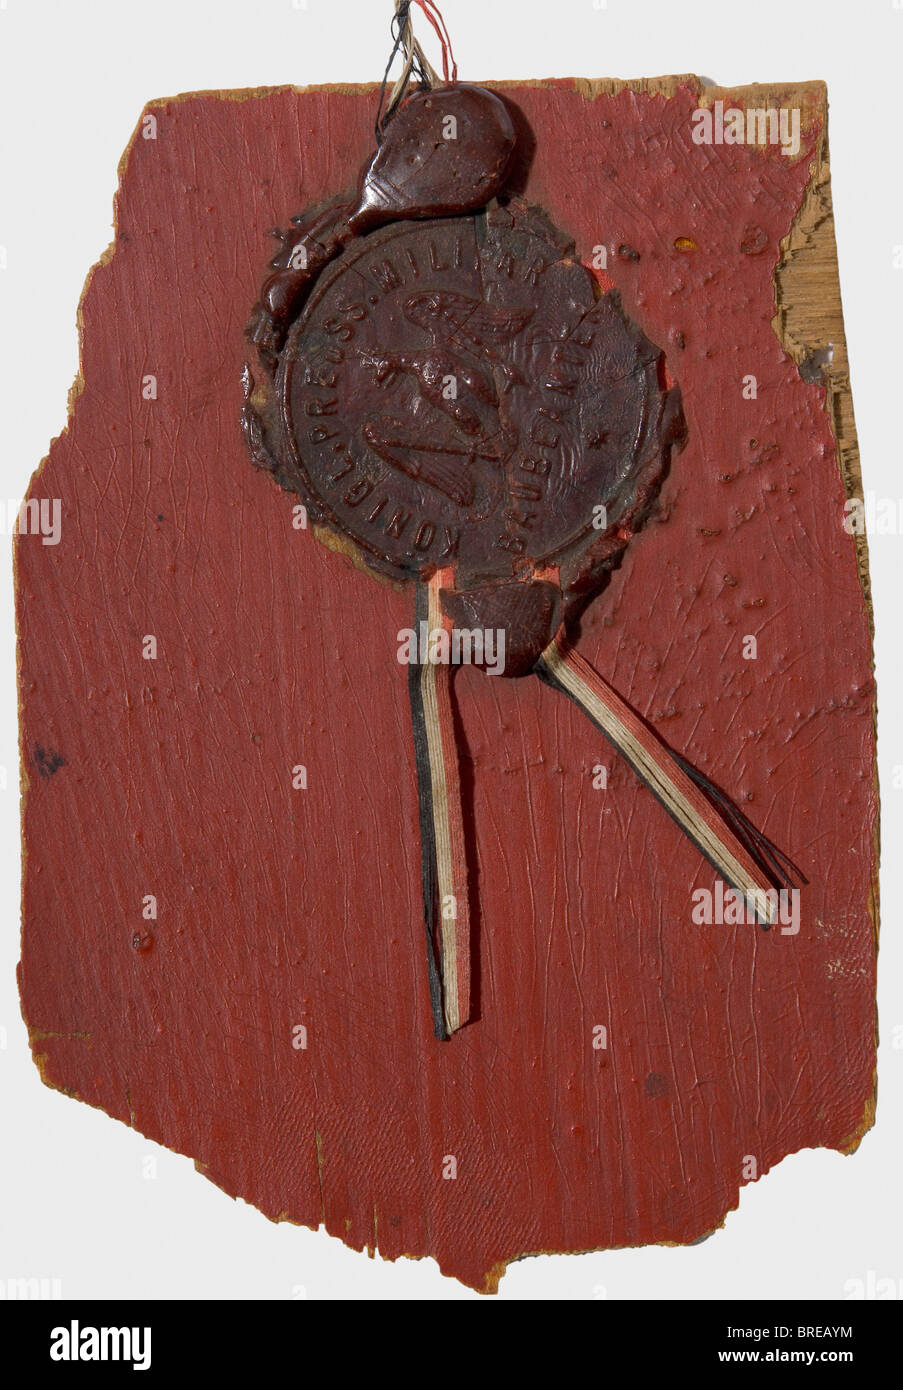 Manfred Freiherr von Richthofen (1892 - 1918), a fragment of the body of an Albatros D V Three-layered plywood, size ca. 72 x 102 mm, painted red on one side, clear coat on the reverse. Attached with sealing wax a typewritten label bearing the inscription (transl.) 'the piece of plywood at hand comes from the aircraft, which landed on 11.6.17 on Crefeld-Bockum airfield. It was flown by combat pilot Cavalry Captain Freiherr von Richthofen and was damaged during the landing manoeuvre. The verification and authenticity is confirmed herewith: 12.6.1917.' With a sta, Stock Photo